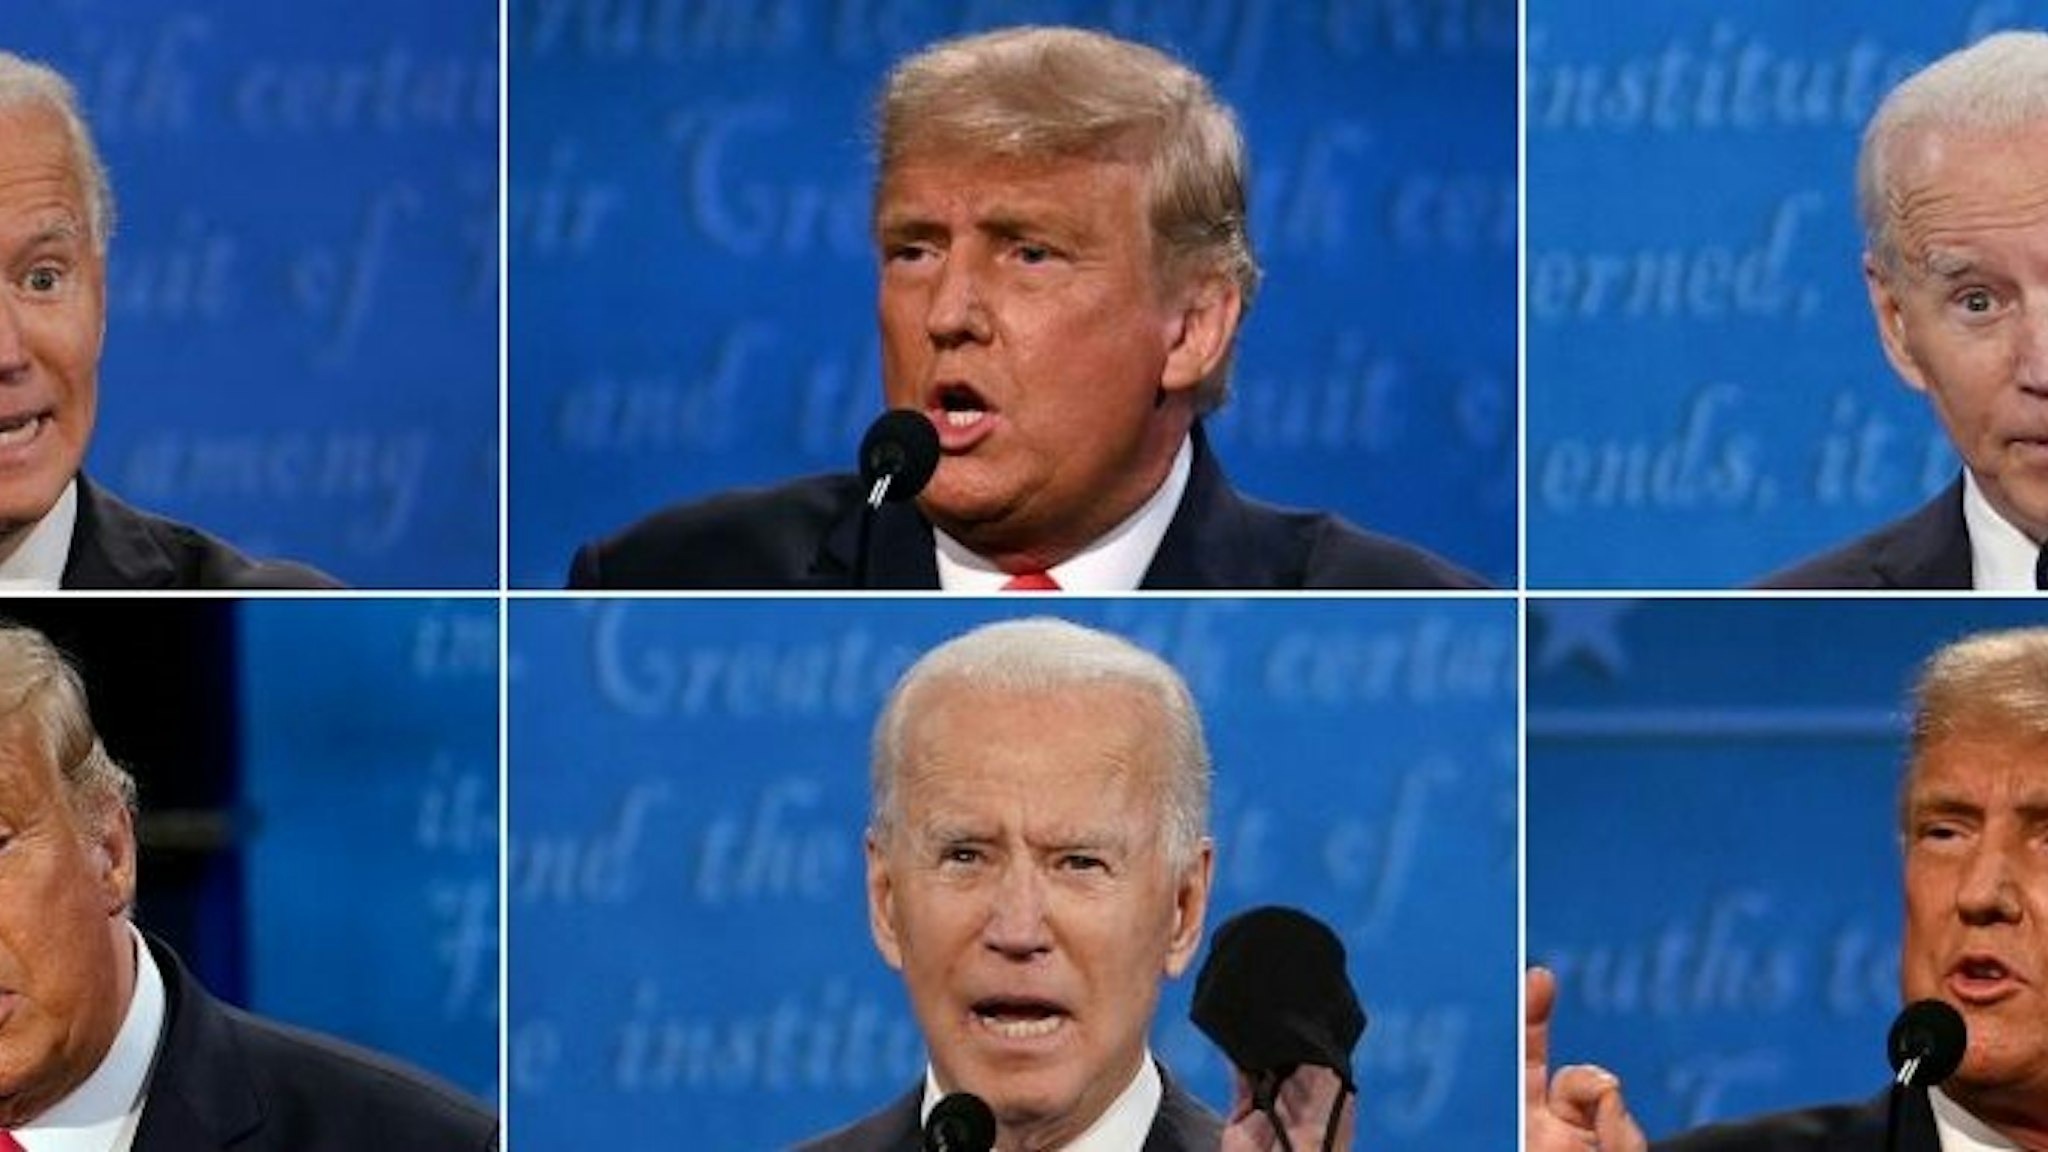 TOPSHOT - (COMBO) This combination of pictures created on October 22, 2020 shows US President Donald Trump and Democratic Presidential candidate and former US Vice President Joe Biden during the final presidential debate at Belmont University in Nashville, Tennessee, on October 22, 2020. (Photos by various sources / AFP) (Photo by